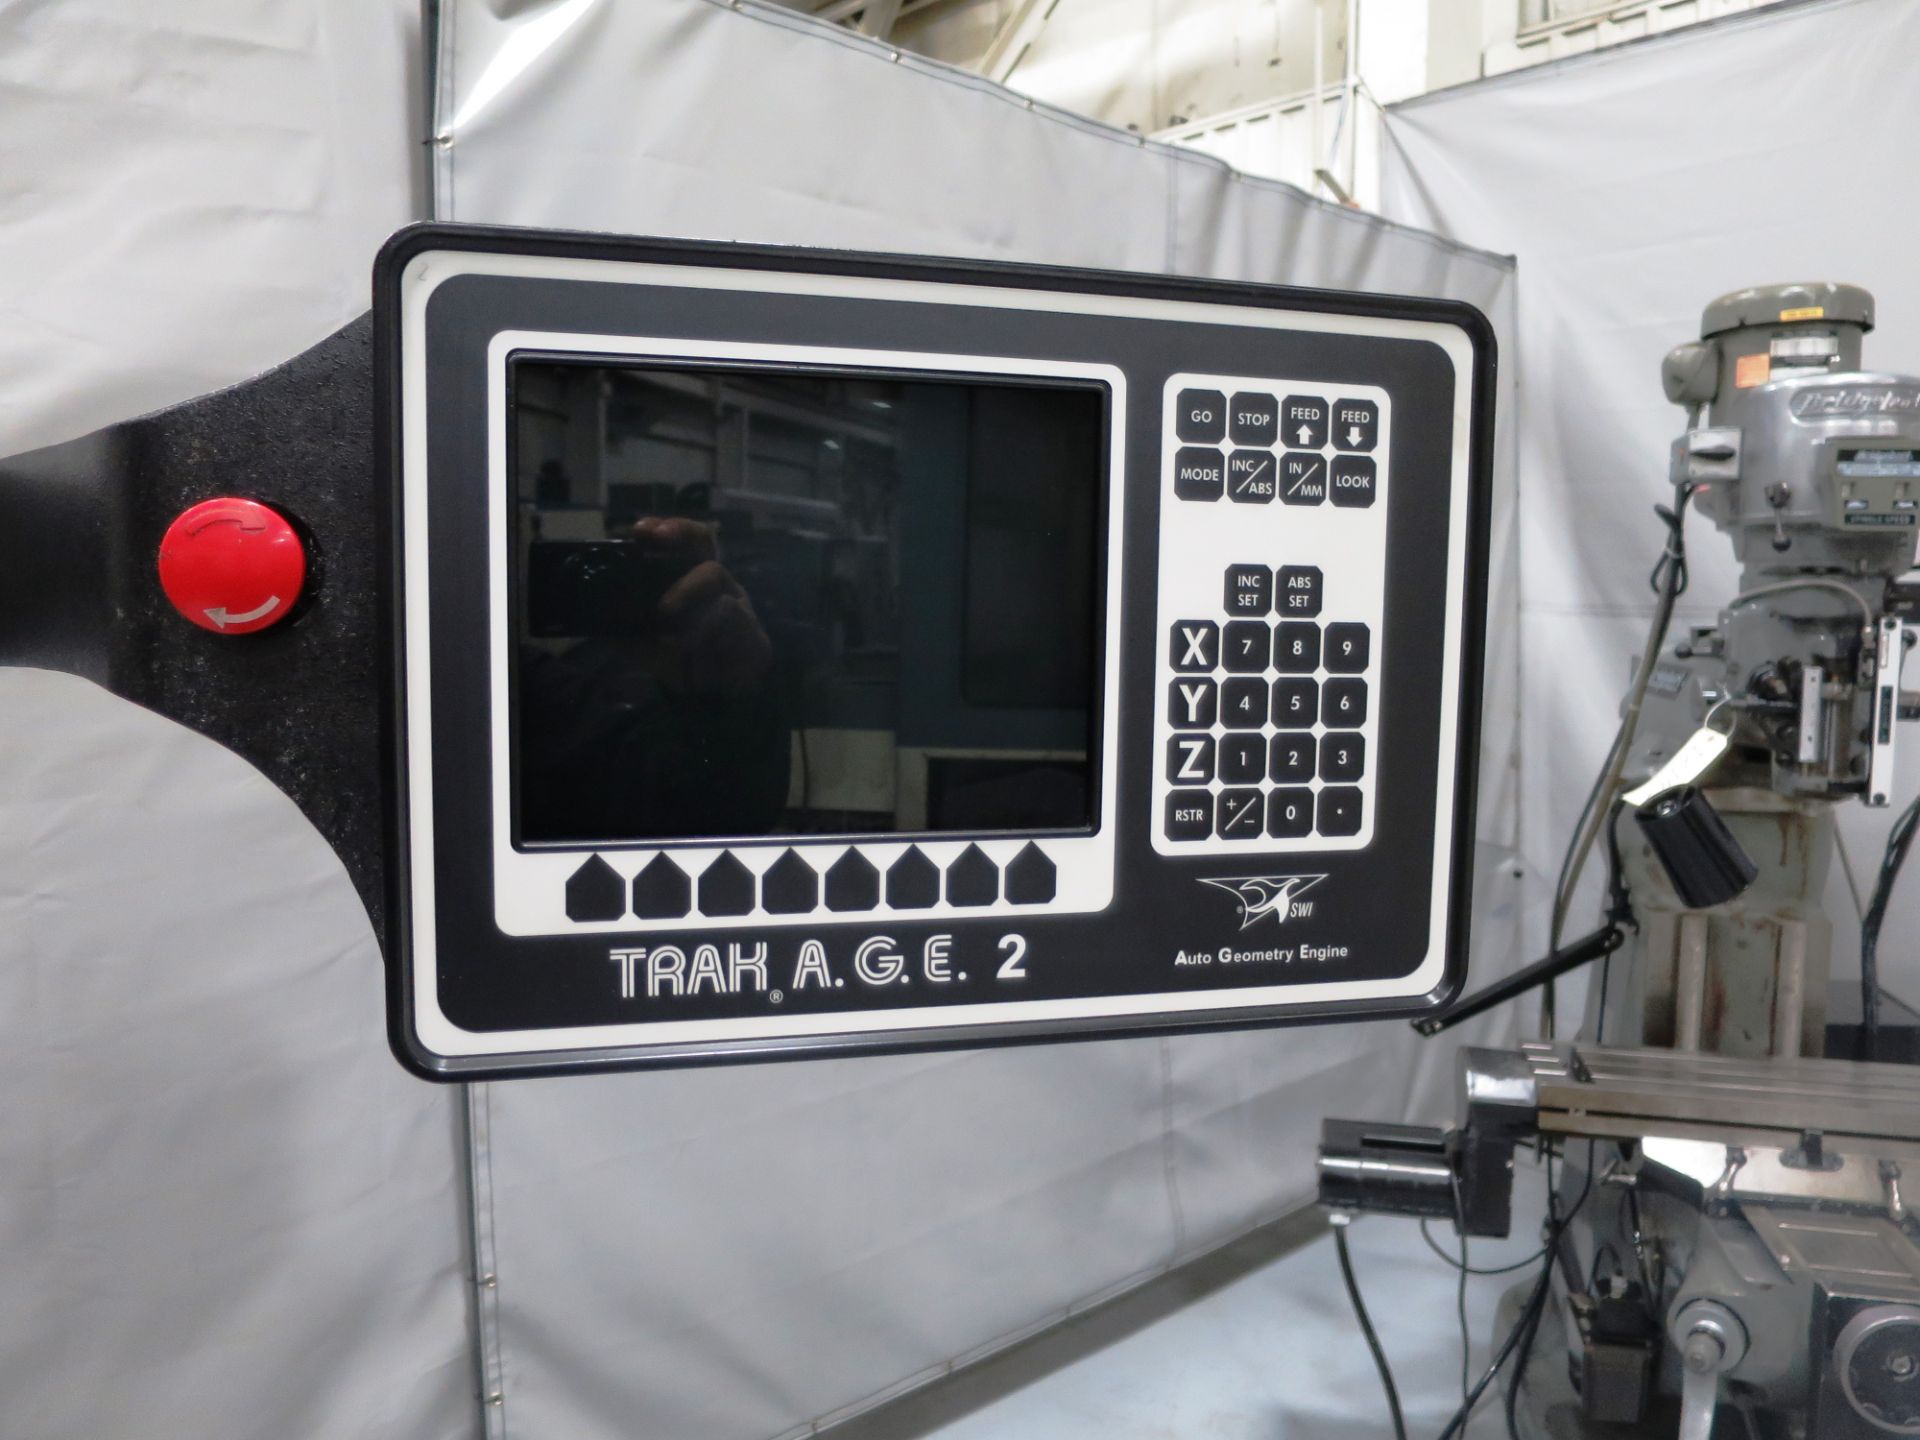 42"x9" 1.5 HP Bridgeport Milling Machine with Trak A.G.E 2 2-Axis CNC Control, S/N BR 139728 - Image 2 of 7